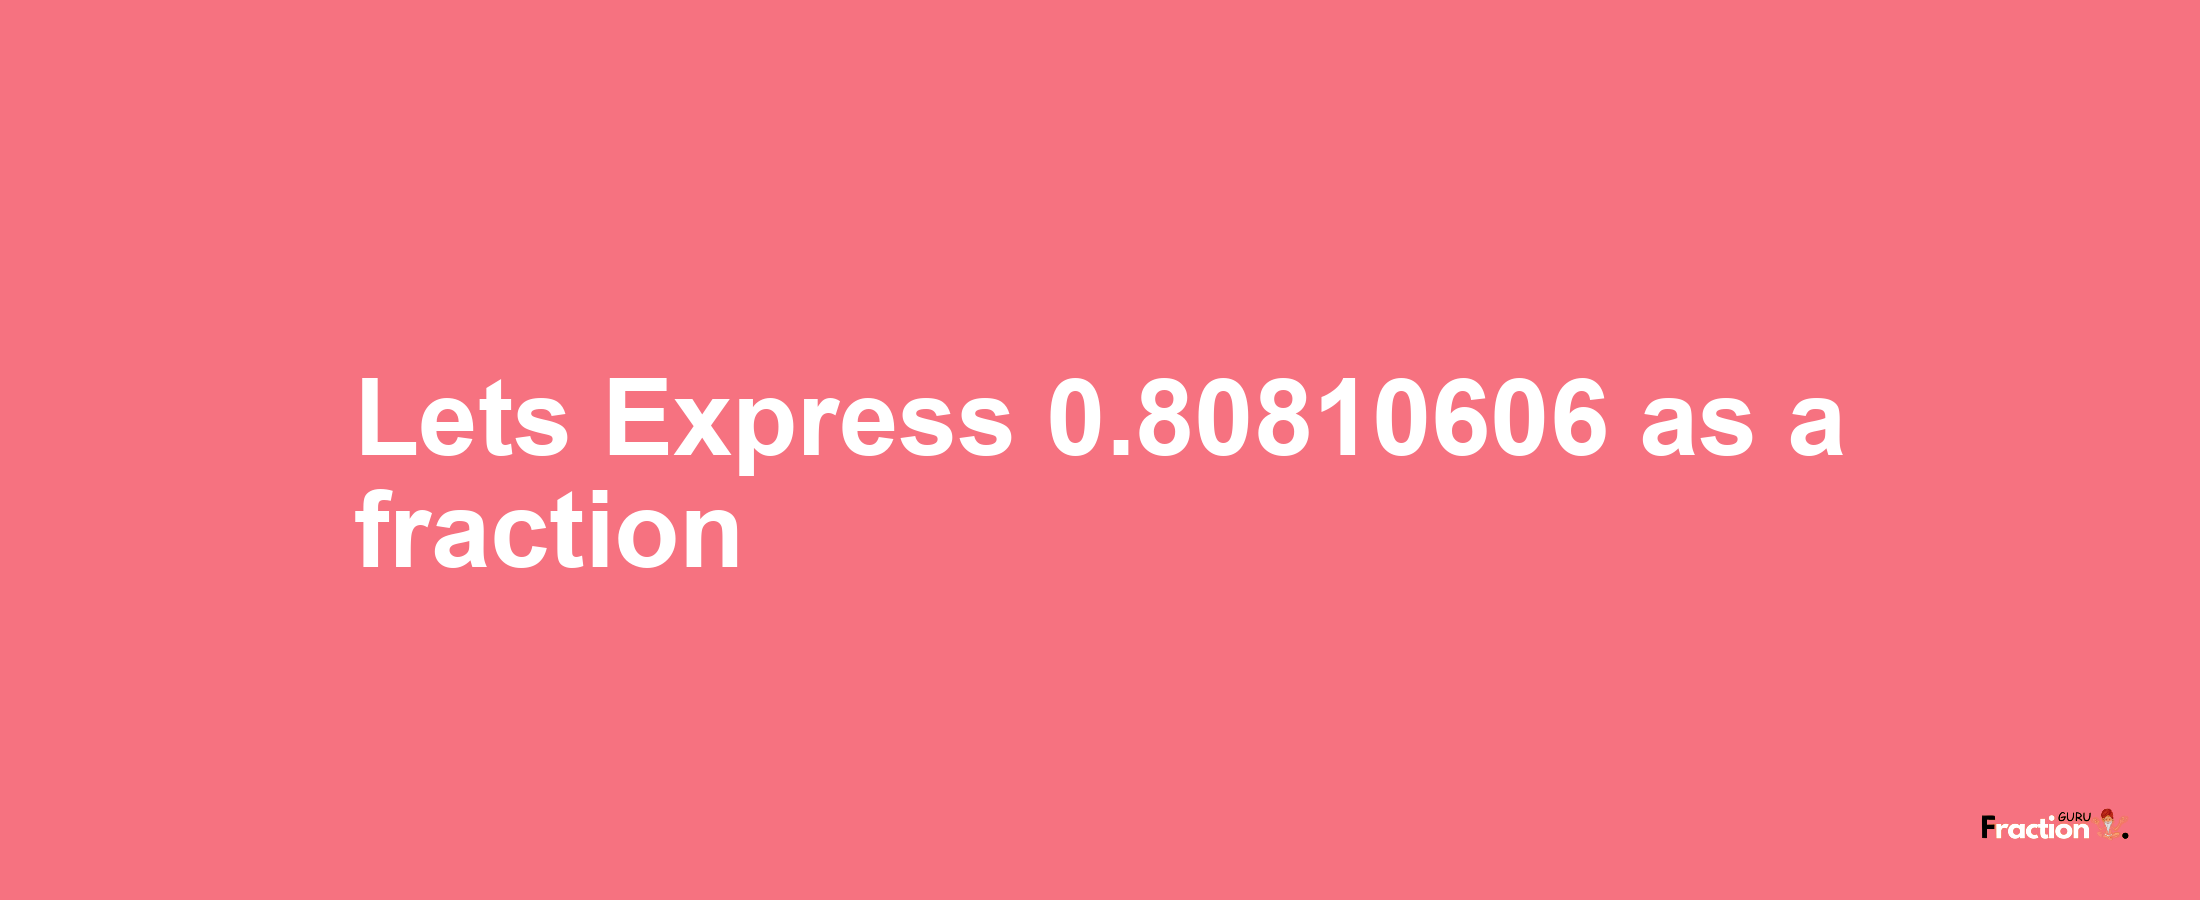 Lets Express 0.80810606 as afraction